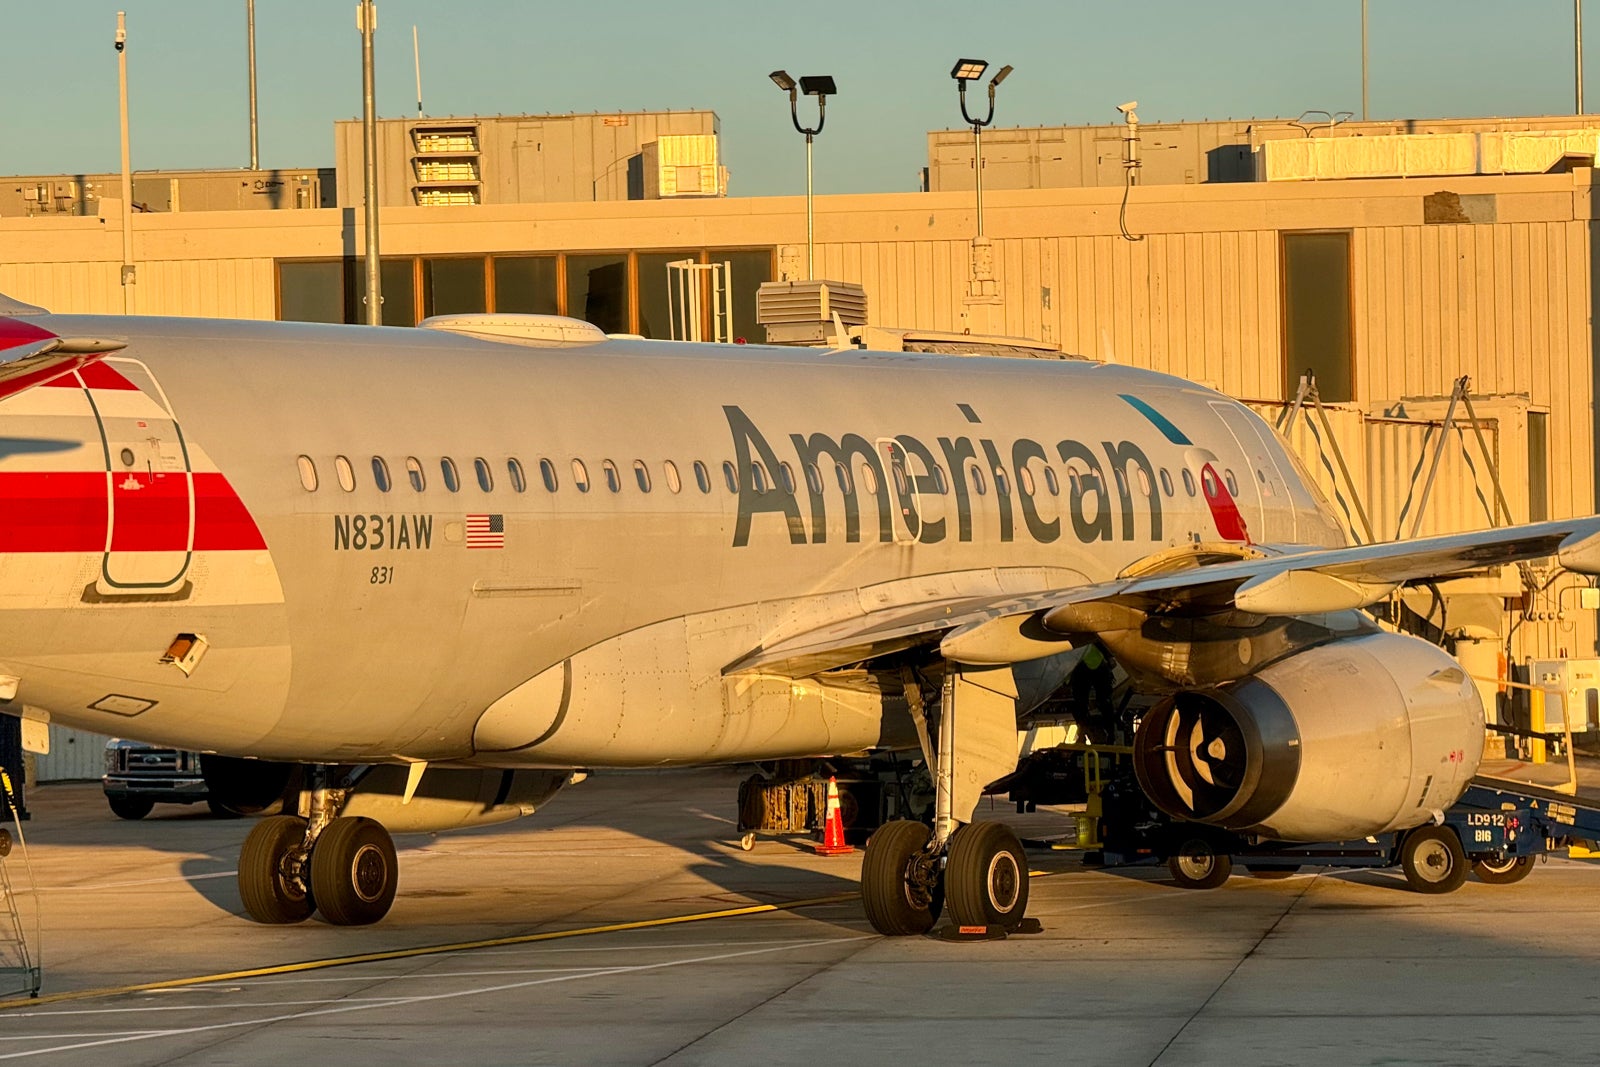 Spring deals: Mexico, Caribbean for 5,000 AAdvantage miles one way